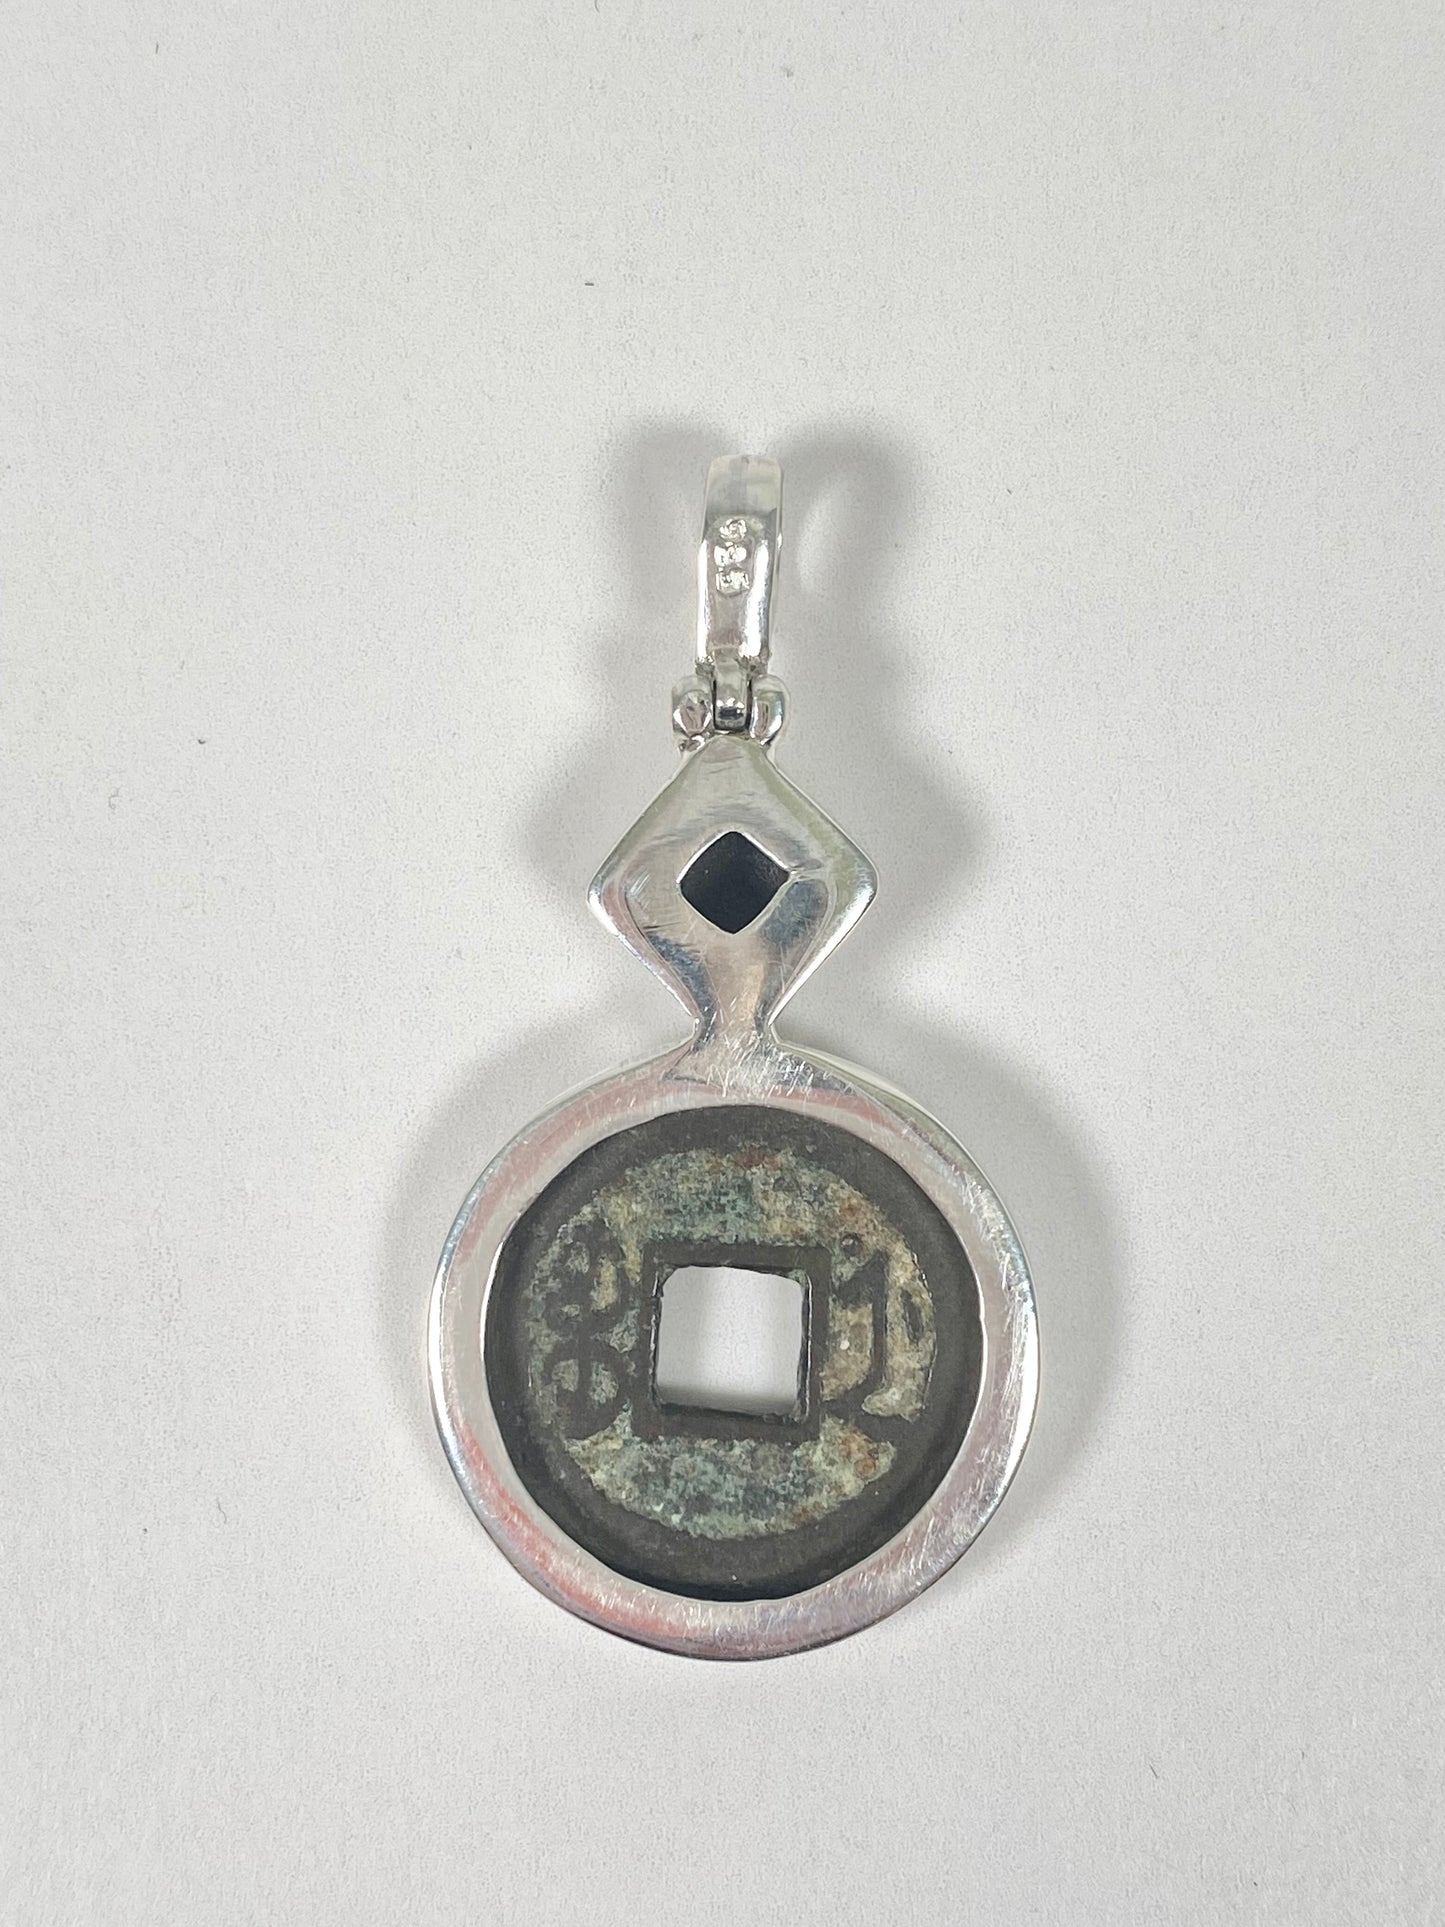 Antique Qing Dynasty Jia Qing Reign (1796-1820) Cash Coin Pendant in Sterling Silver w Garnet